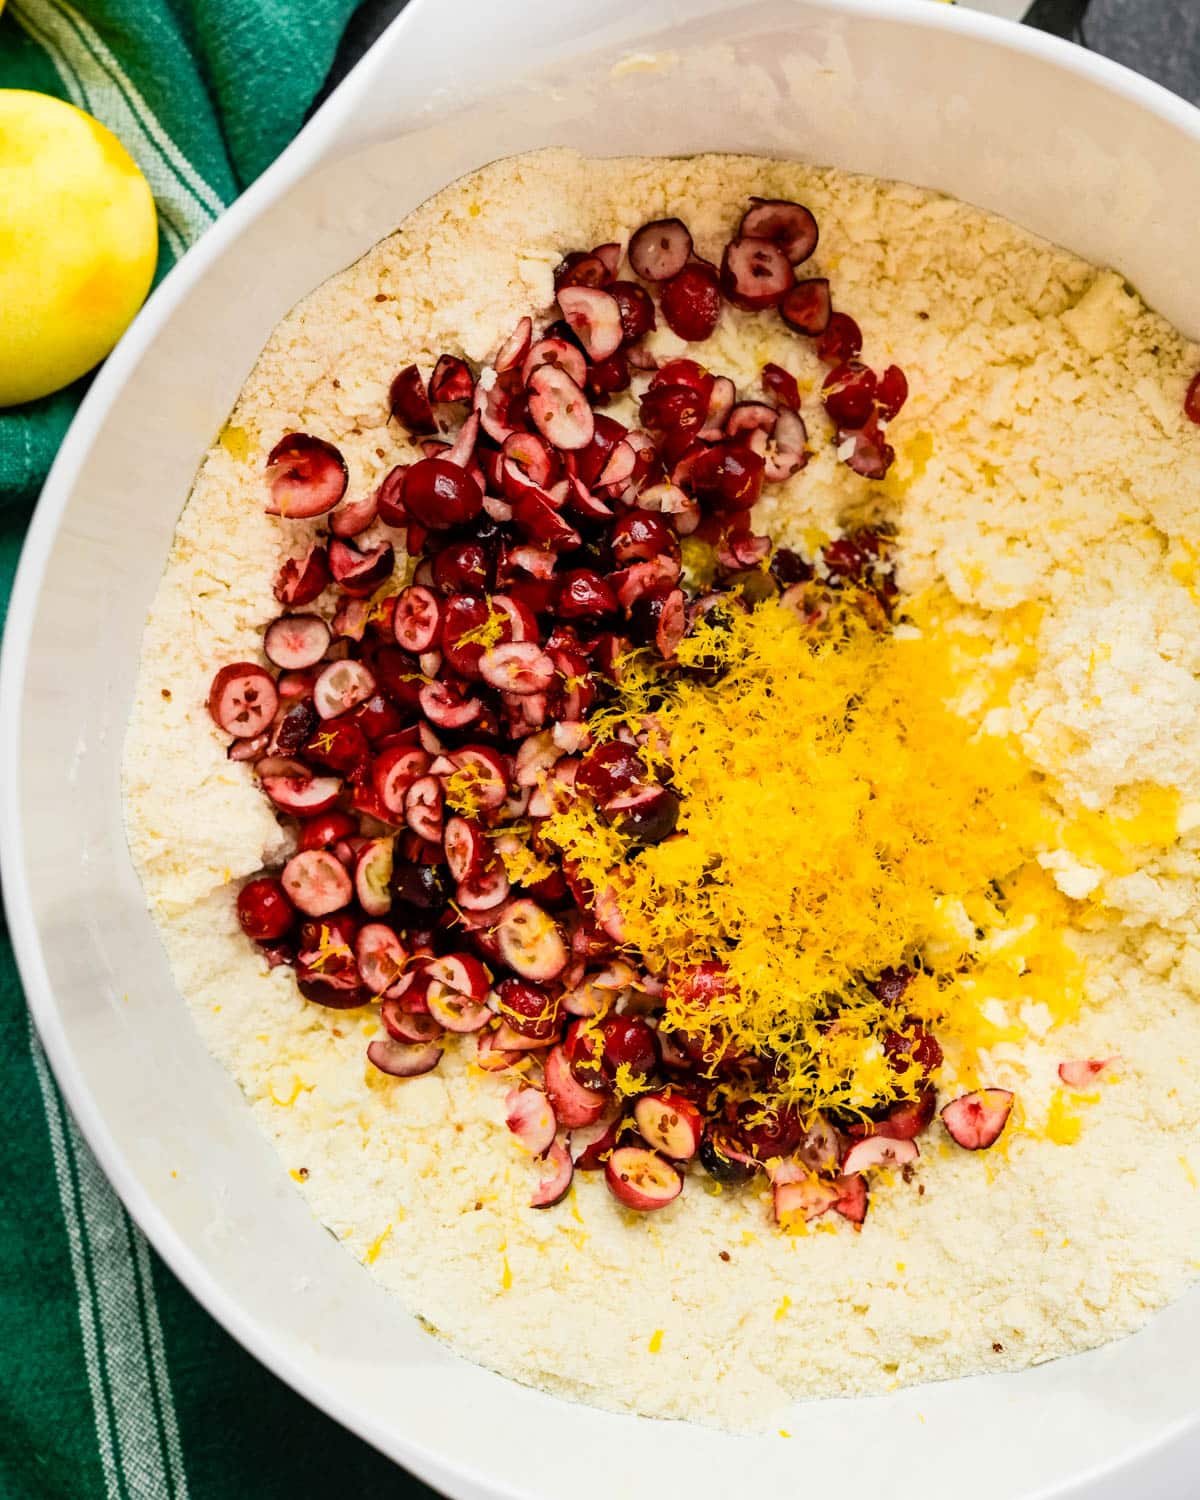 Adding chopped cranberries and lemon zest to the dry ingredients.